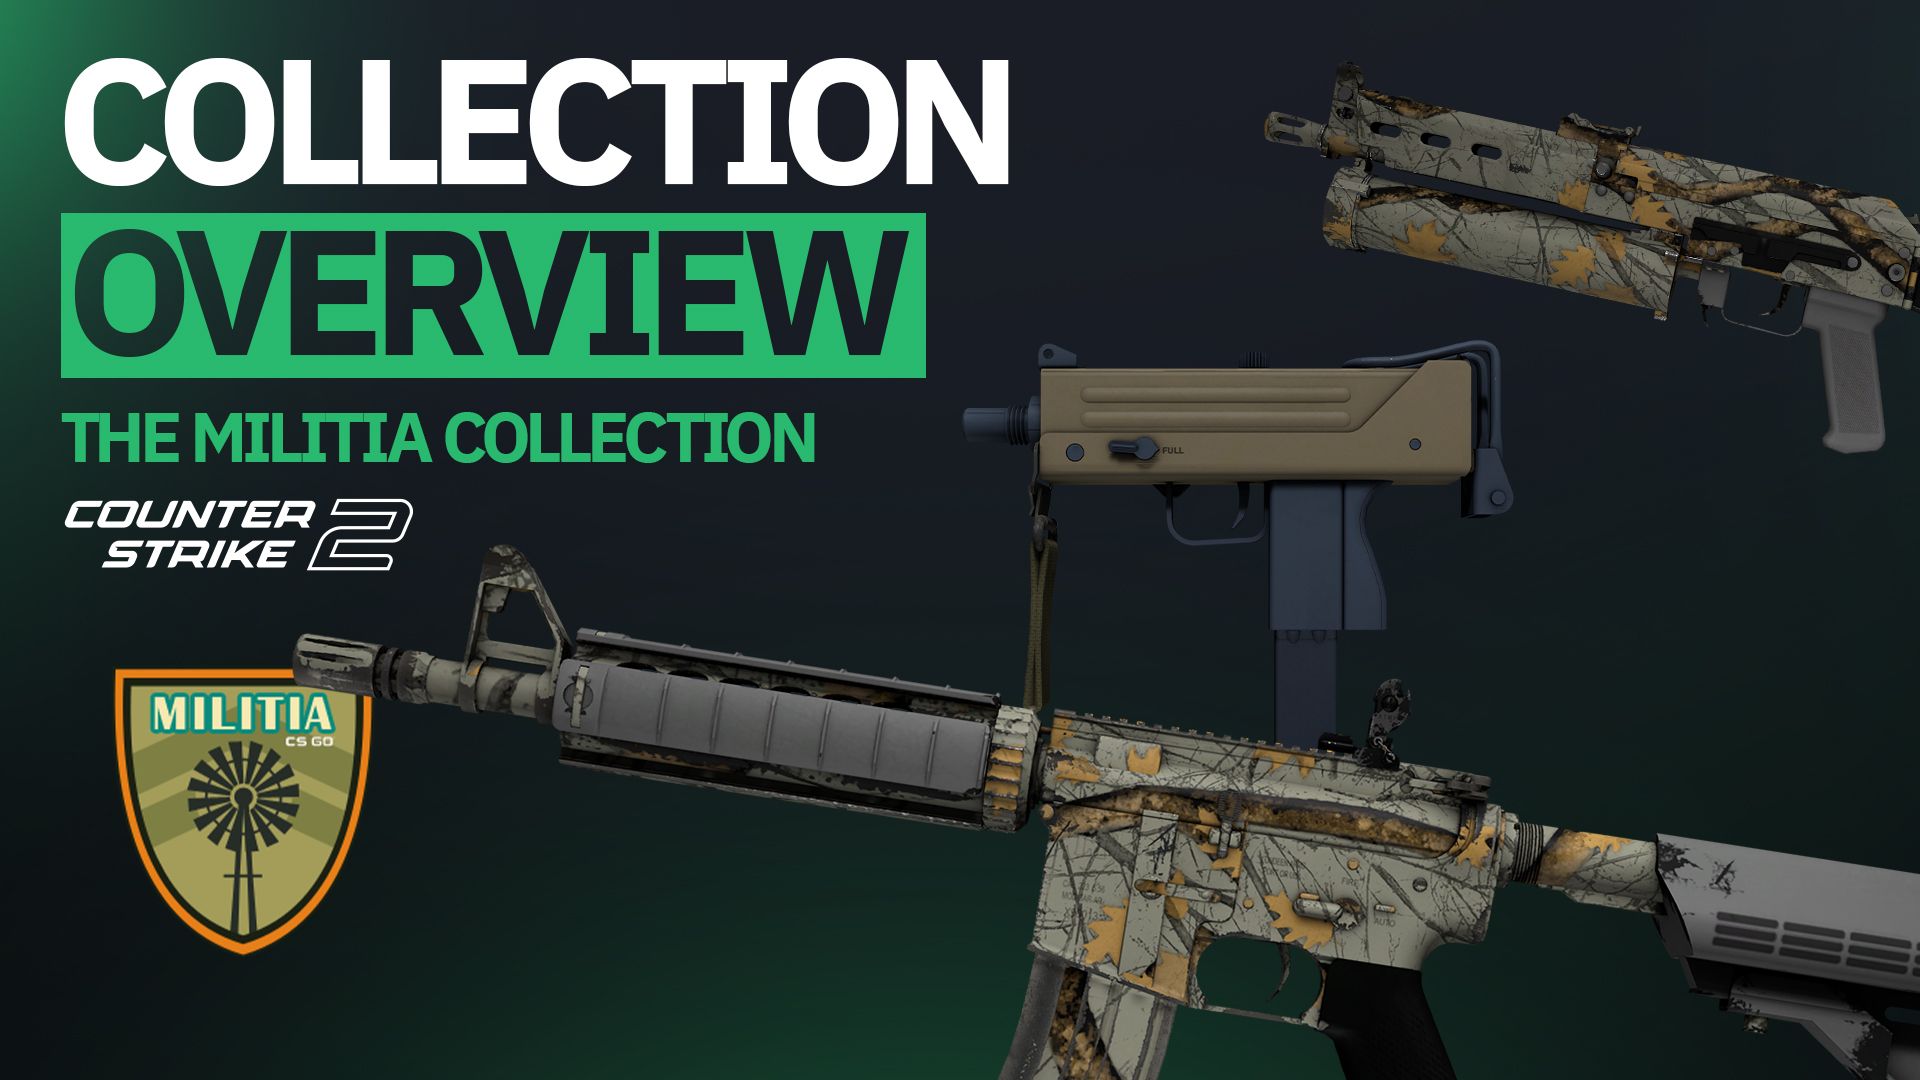 Collection Overview: The Militia Collection